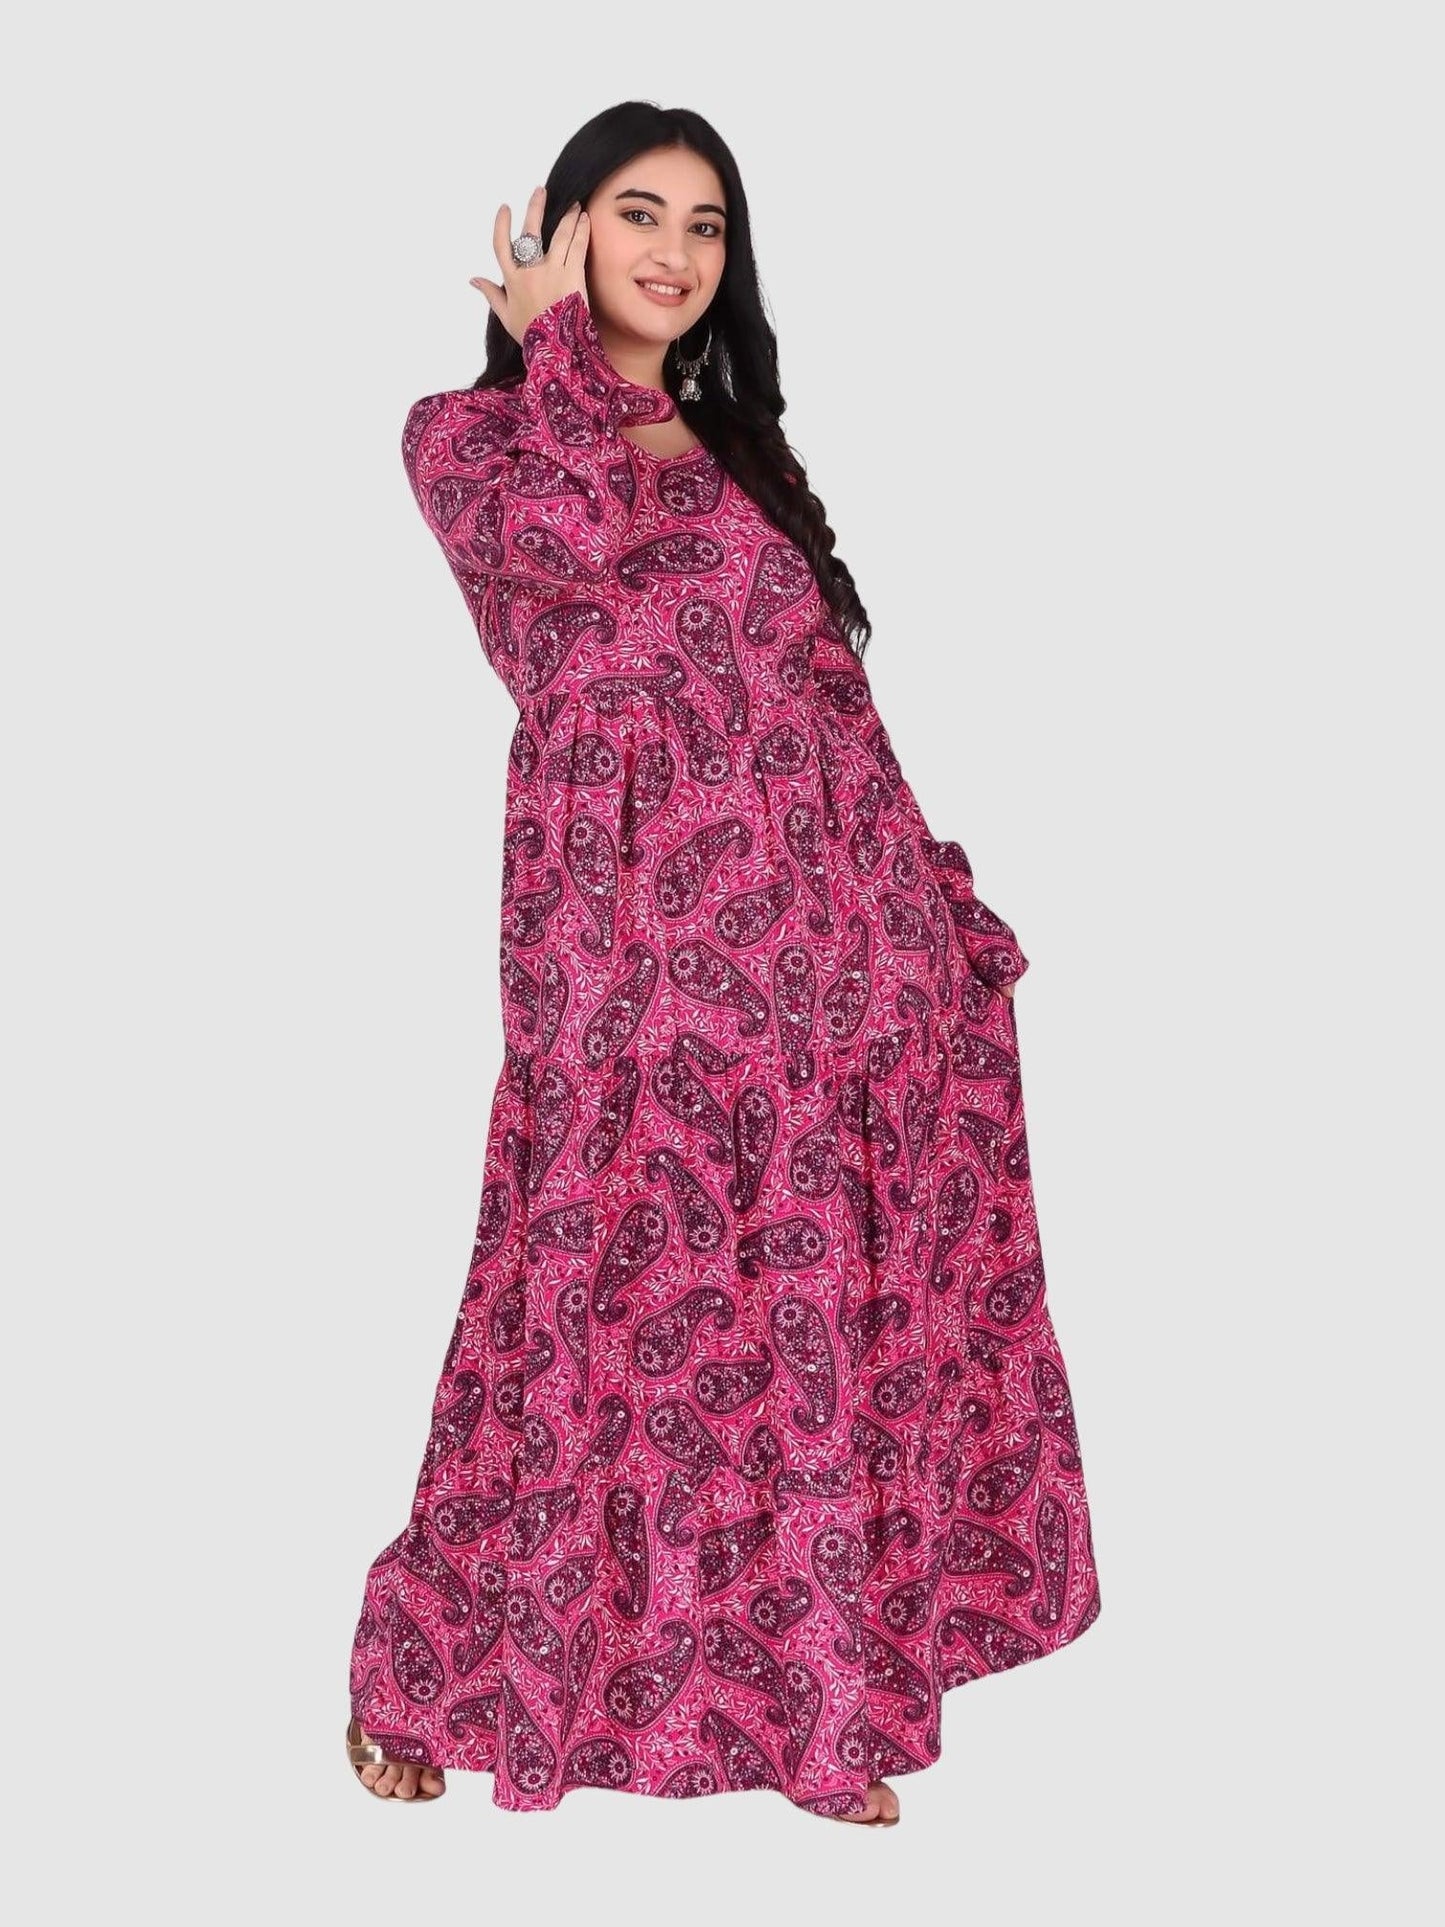 Milly Maxi Pink - Jazz & Milly  Women's Clothing